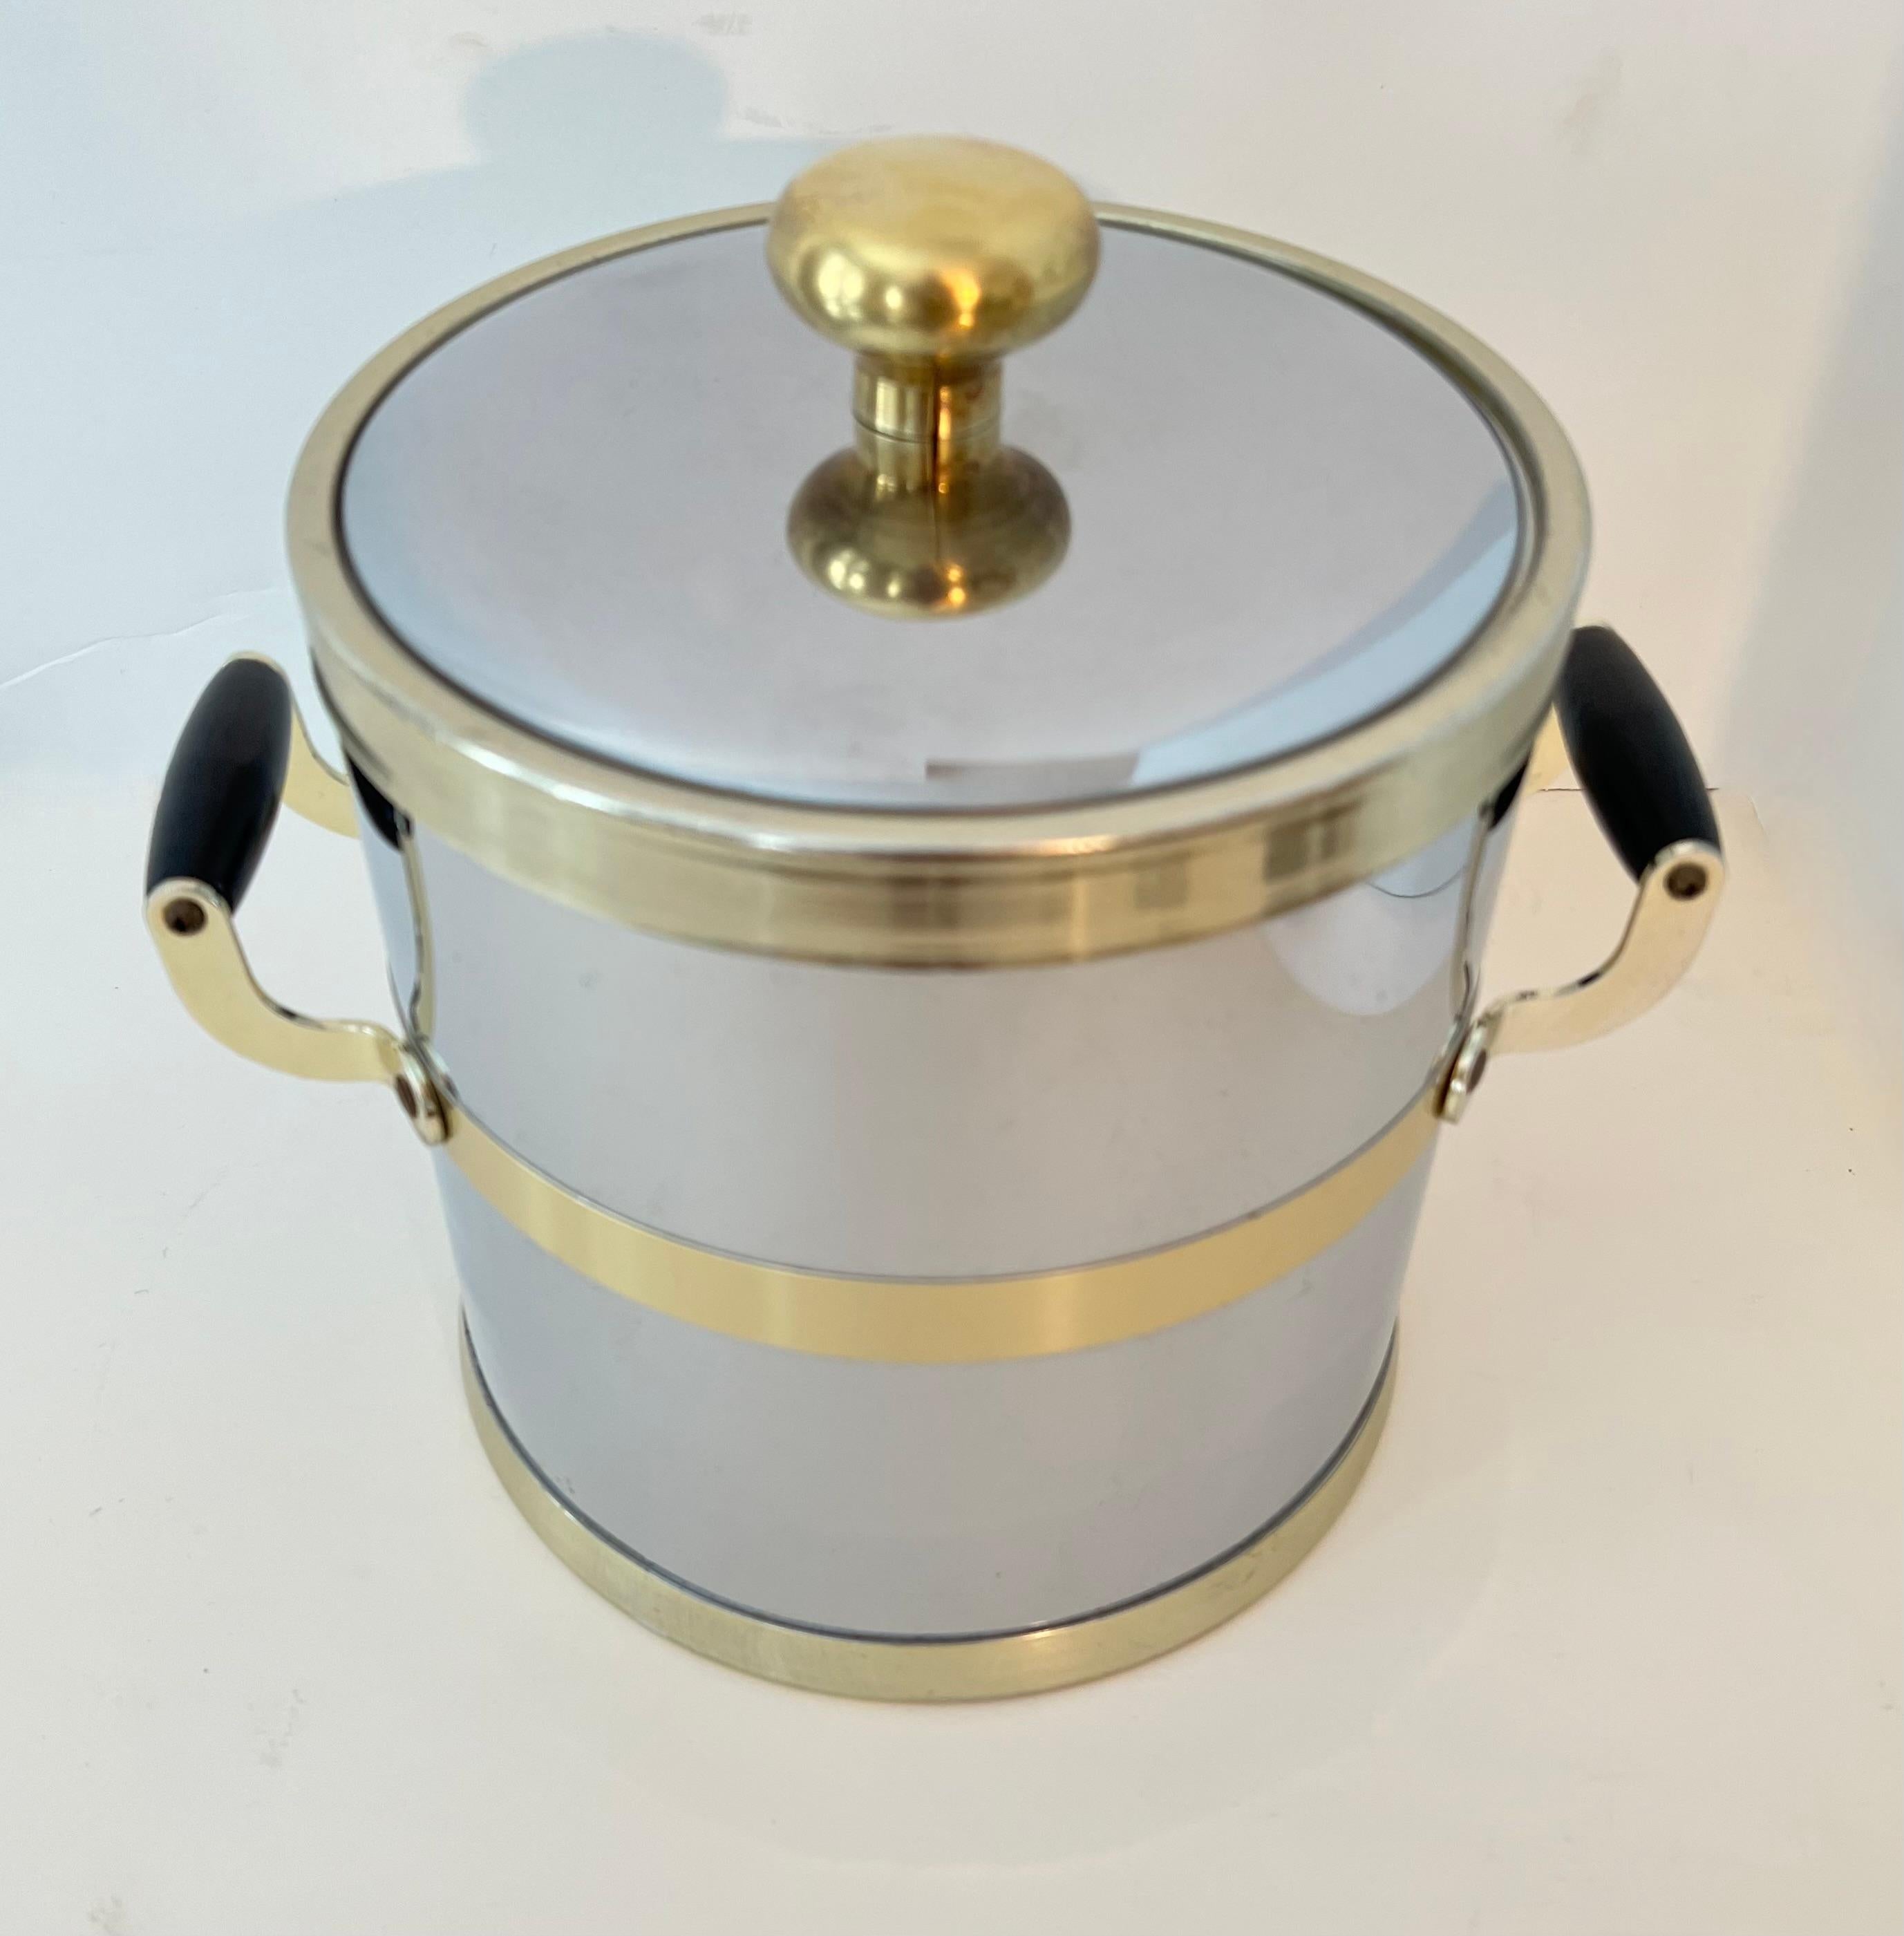 A sleek and stylish Mid-Century Modern ice bucket in polished chrome with brass detailing and black wooden handles. The piece has a plastic liner, all in great condition. 

A compliment to any bar.